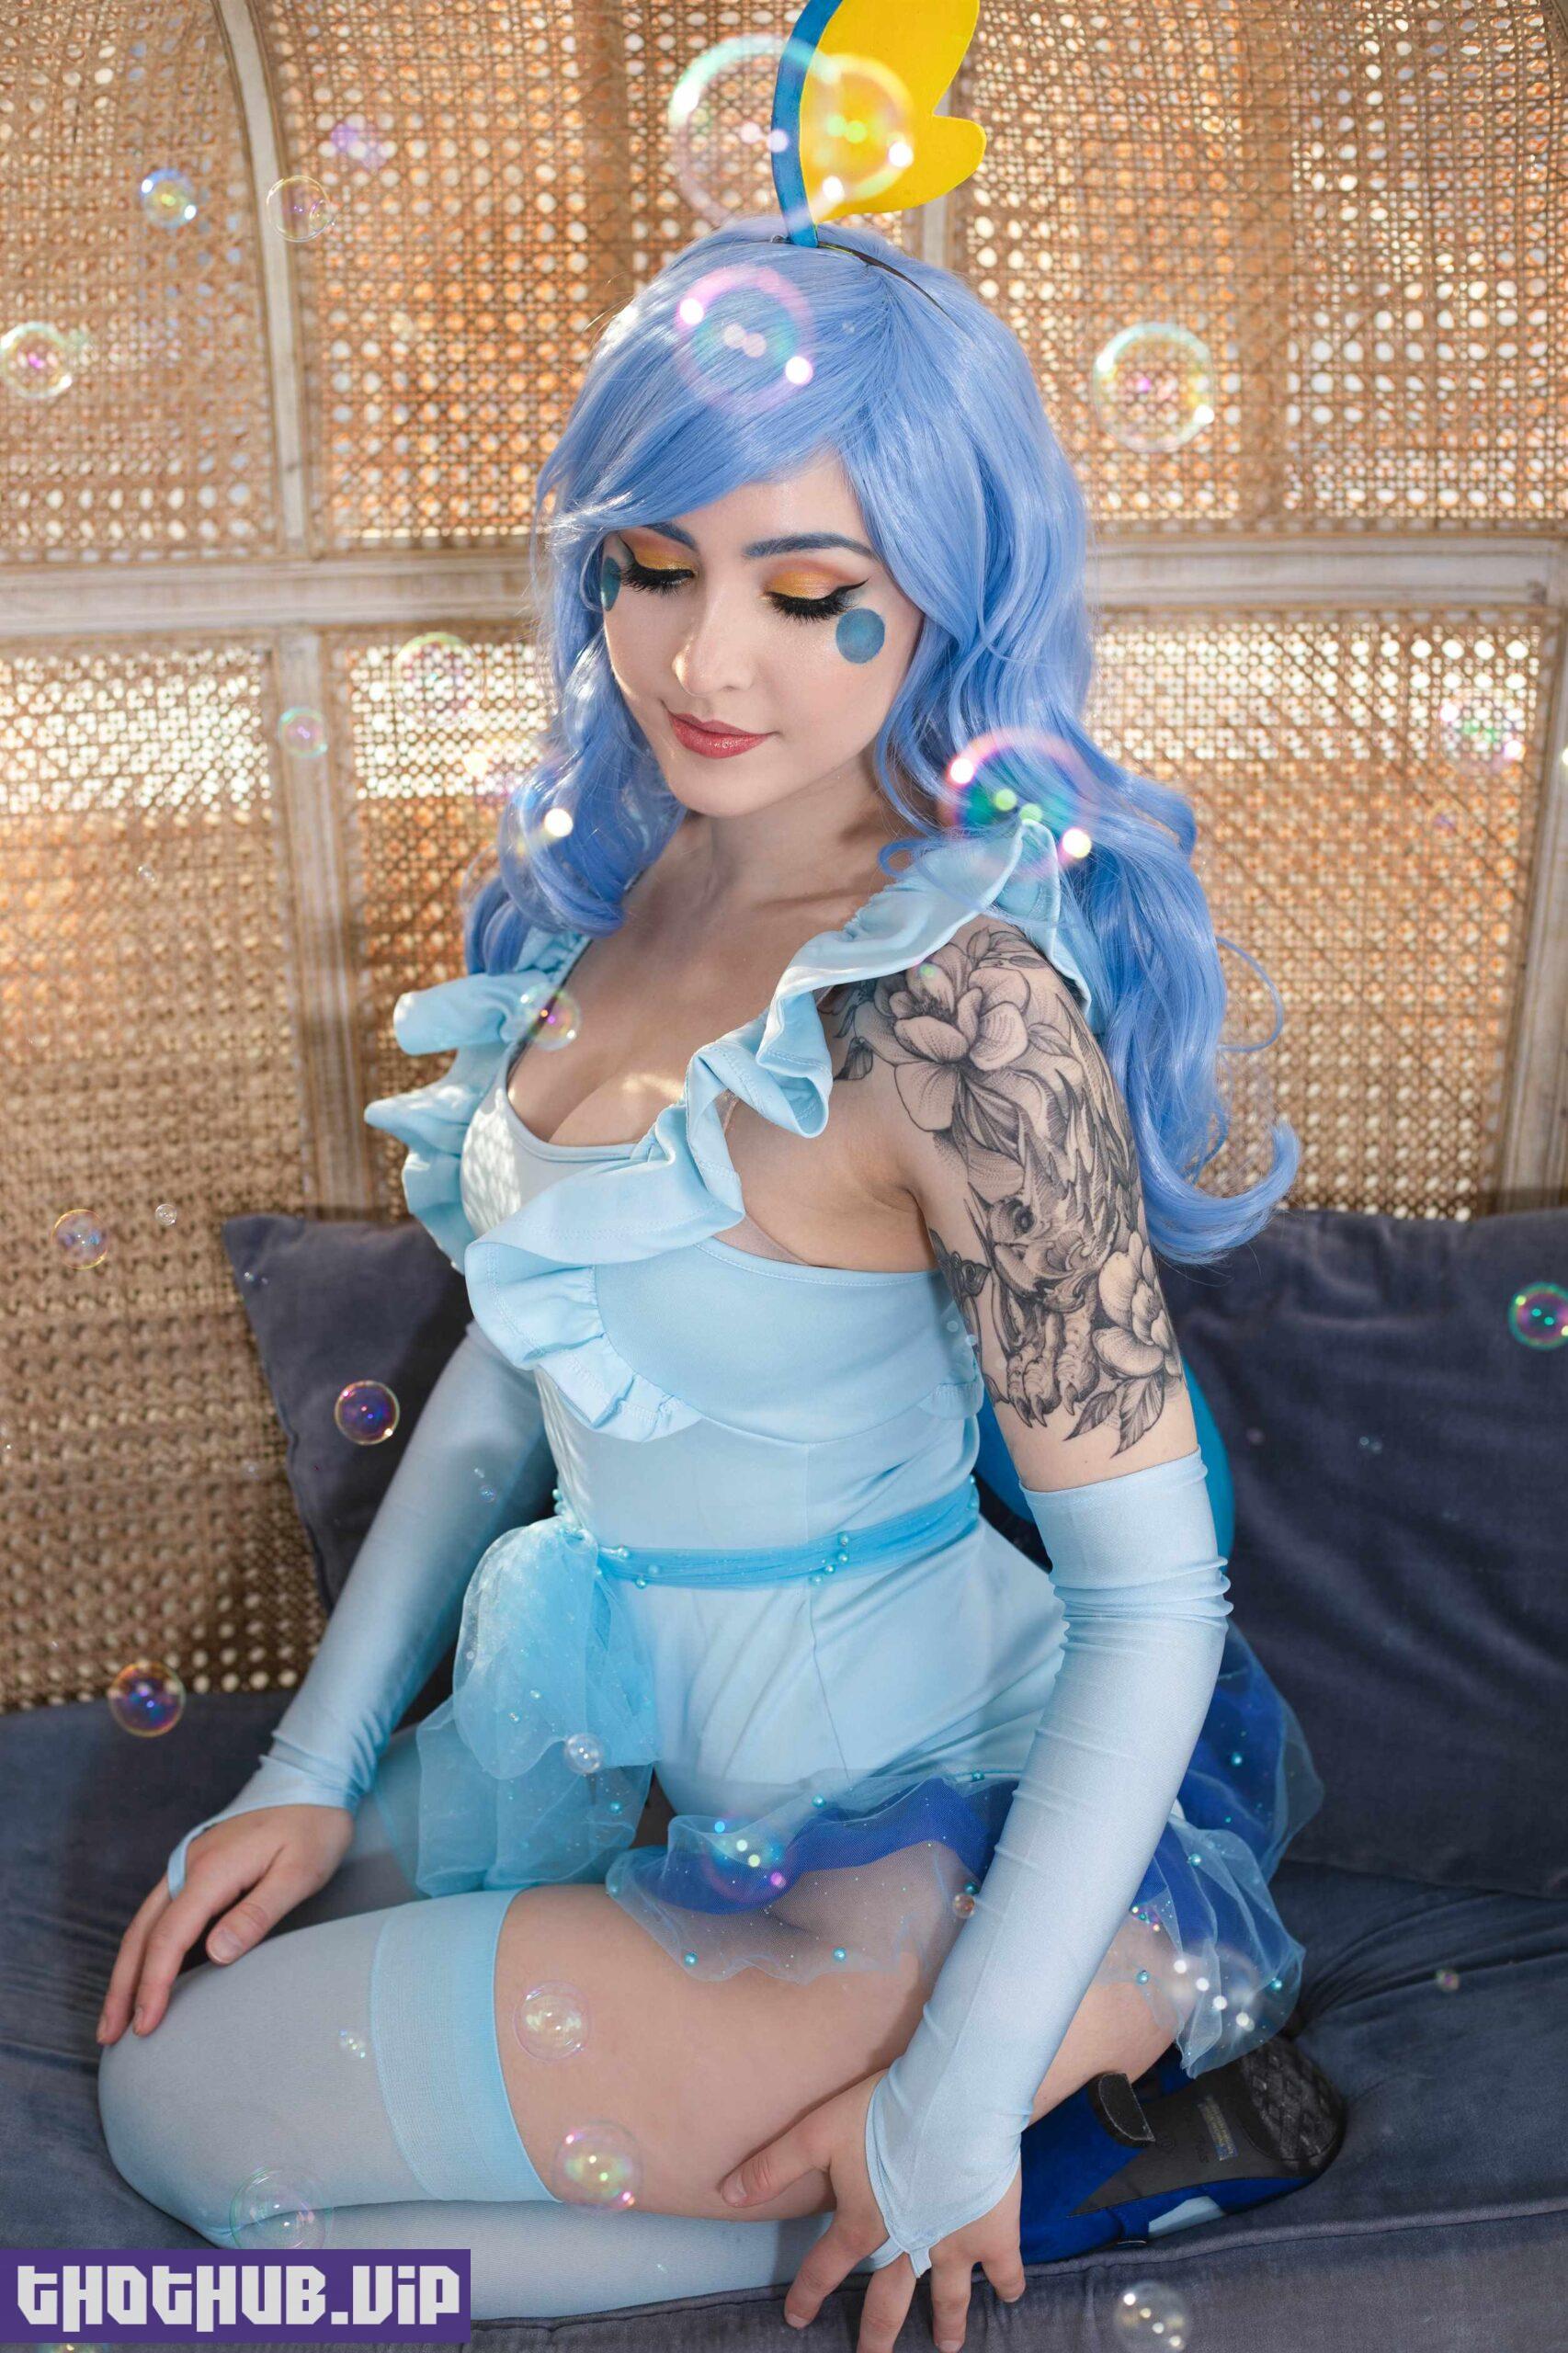 1650037813 80 Luxlo Cosplay Sobble 20 scaled